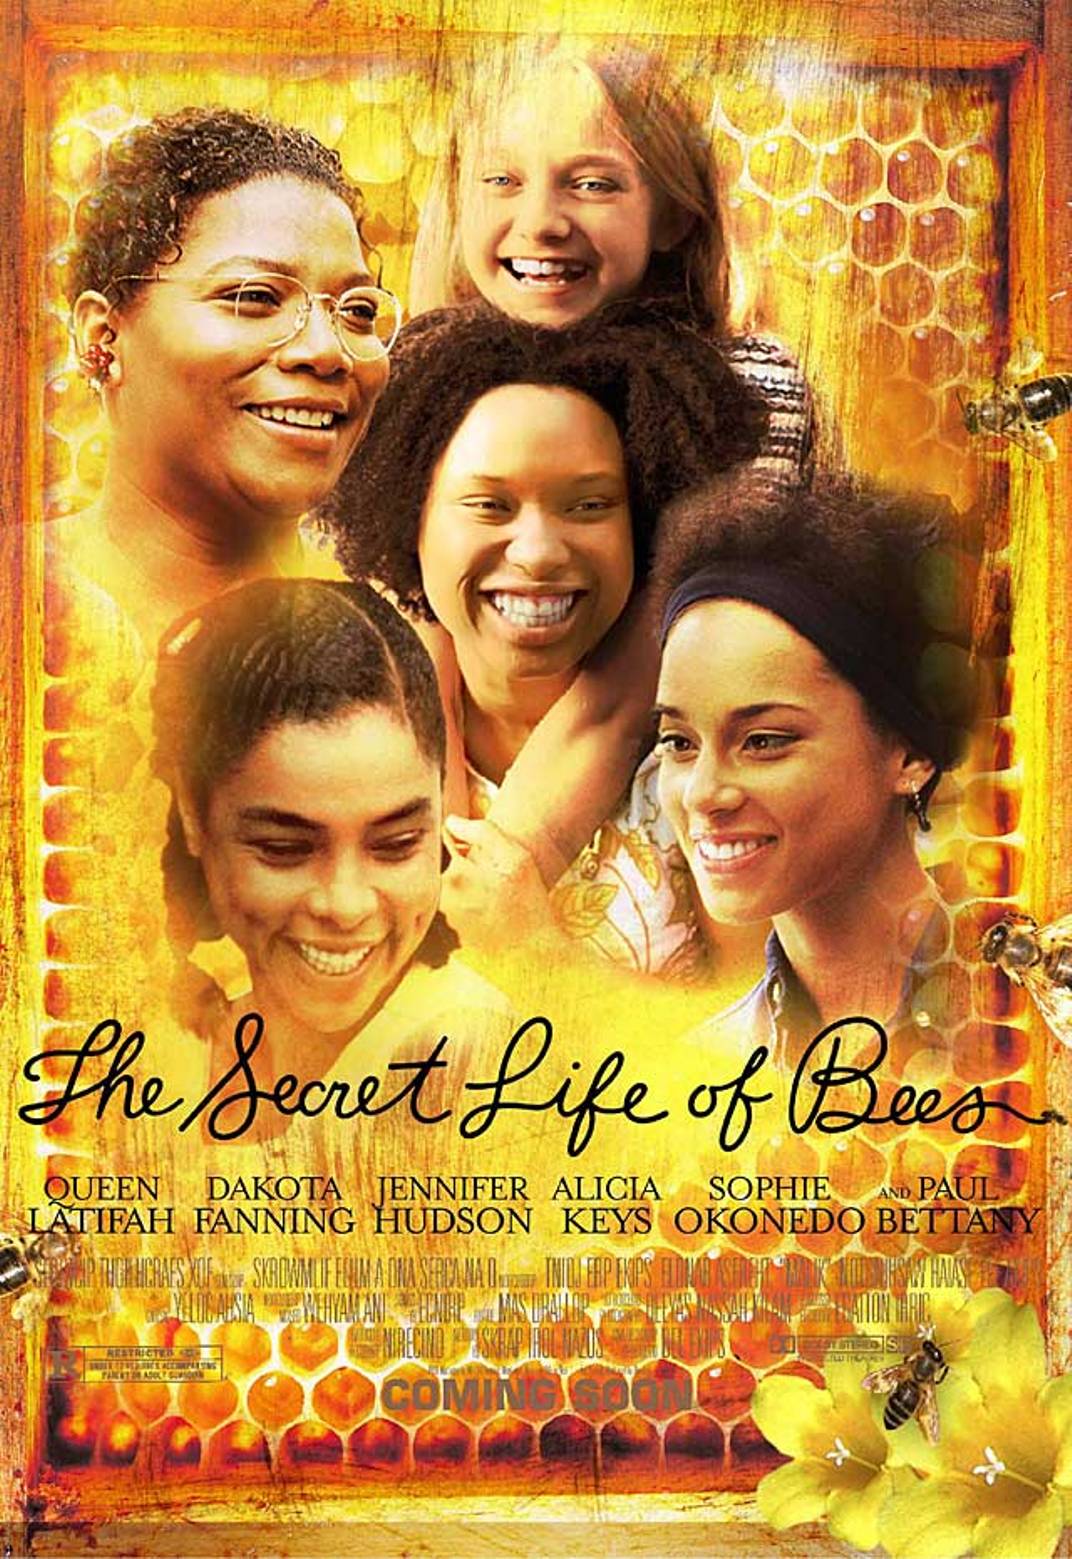 movie reviews of secret life of bees